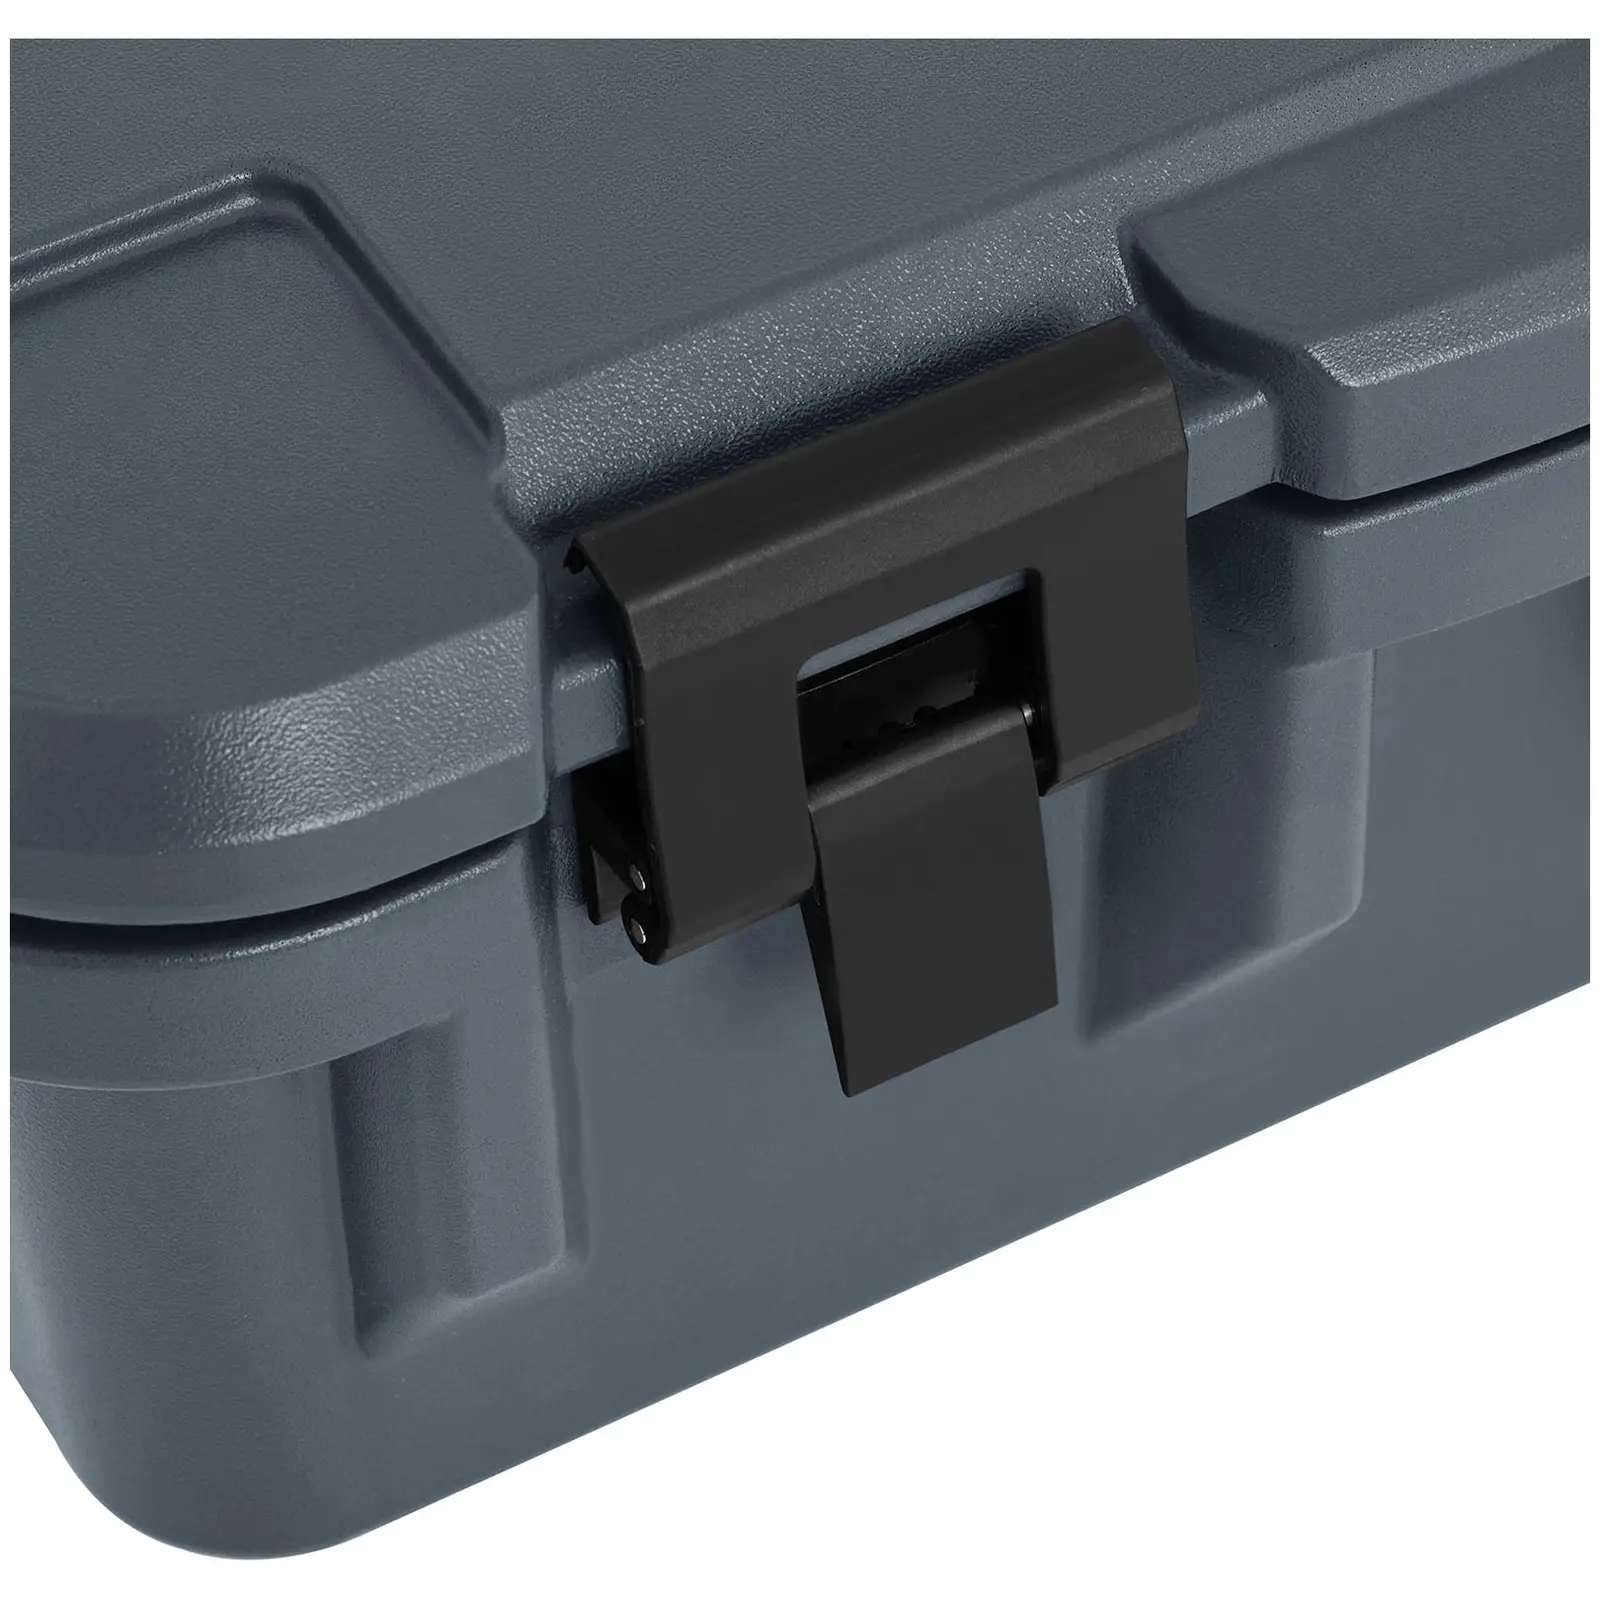 Thermo Box - top loader - for GN containers (15 cm deep)